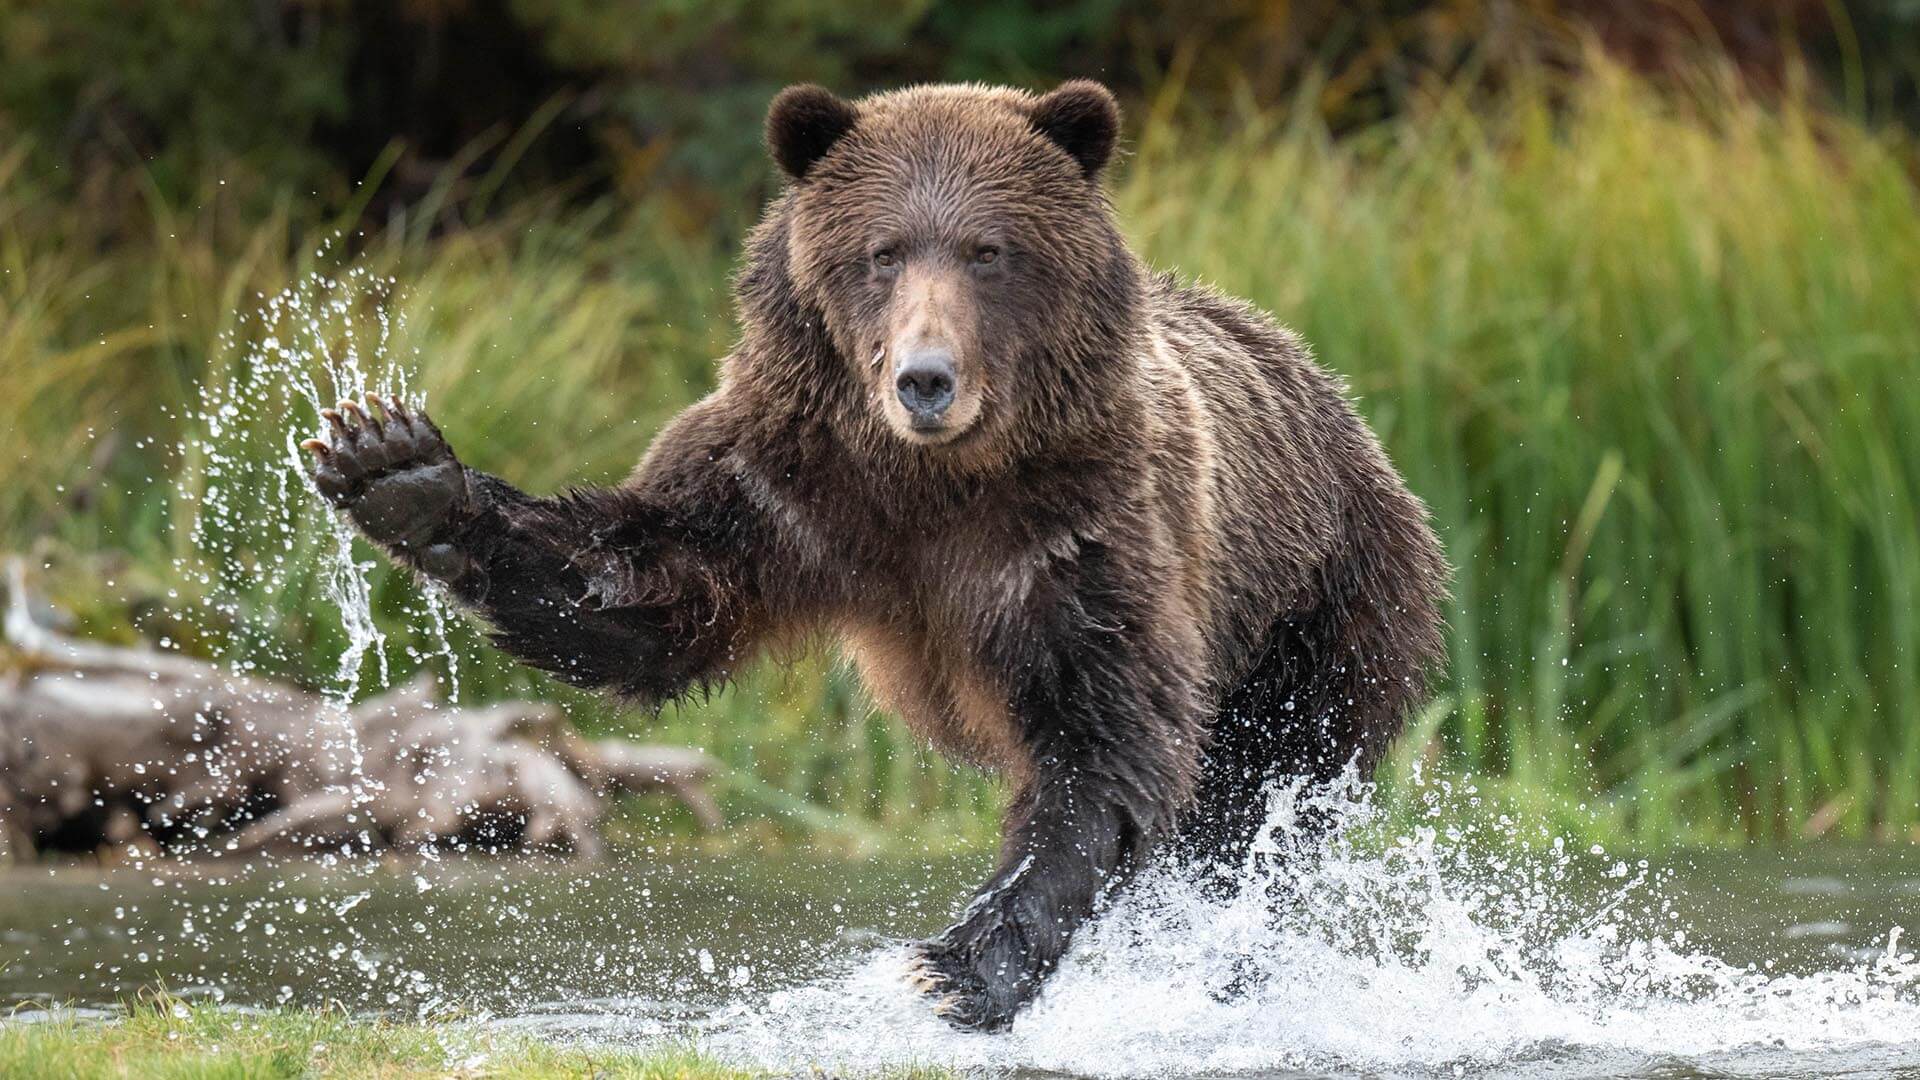 How to avoid bear confrontations in the backcountry